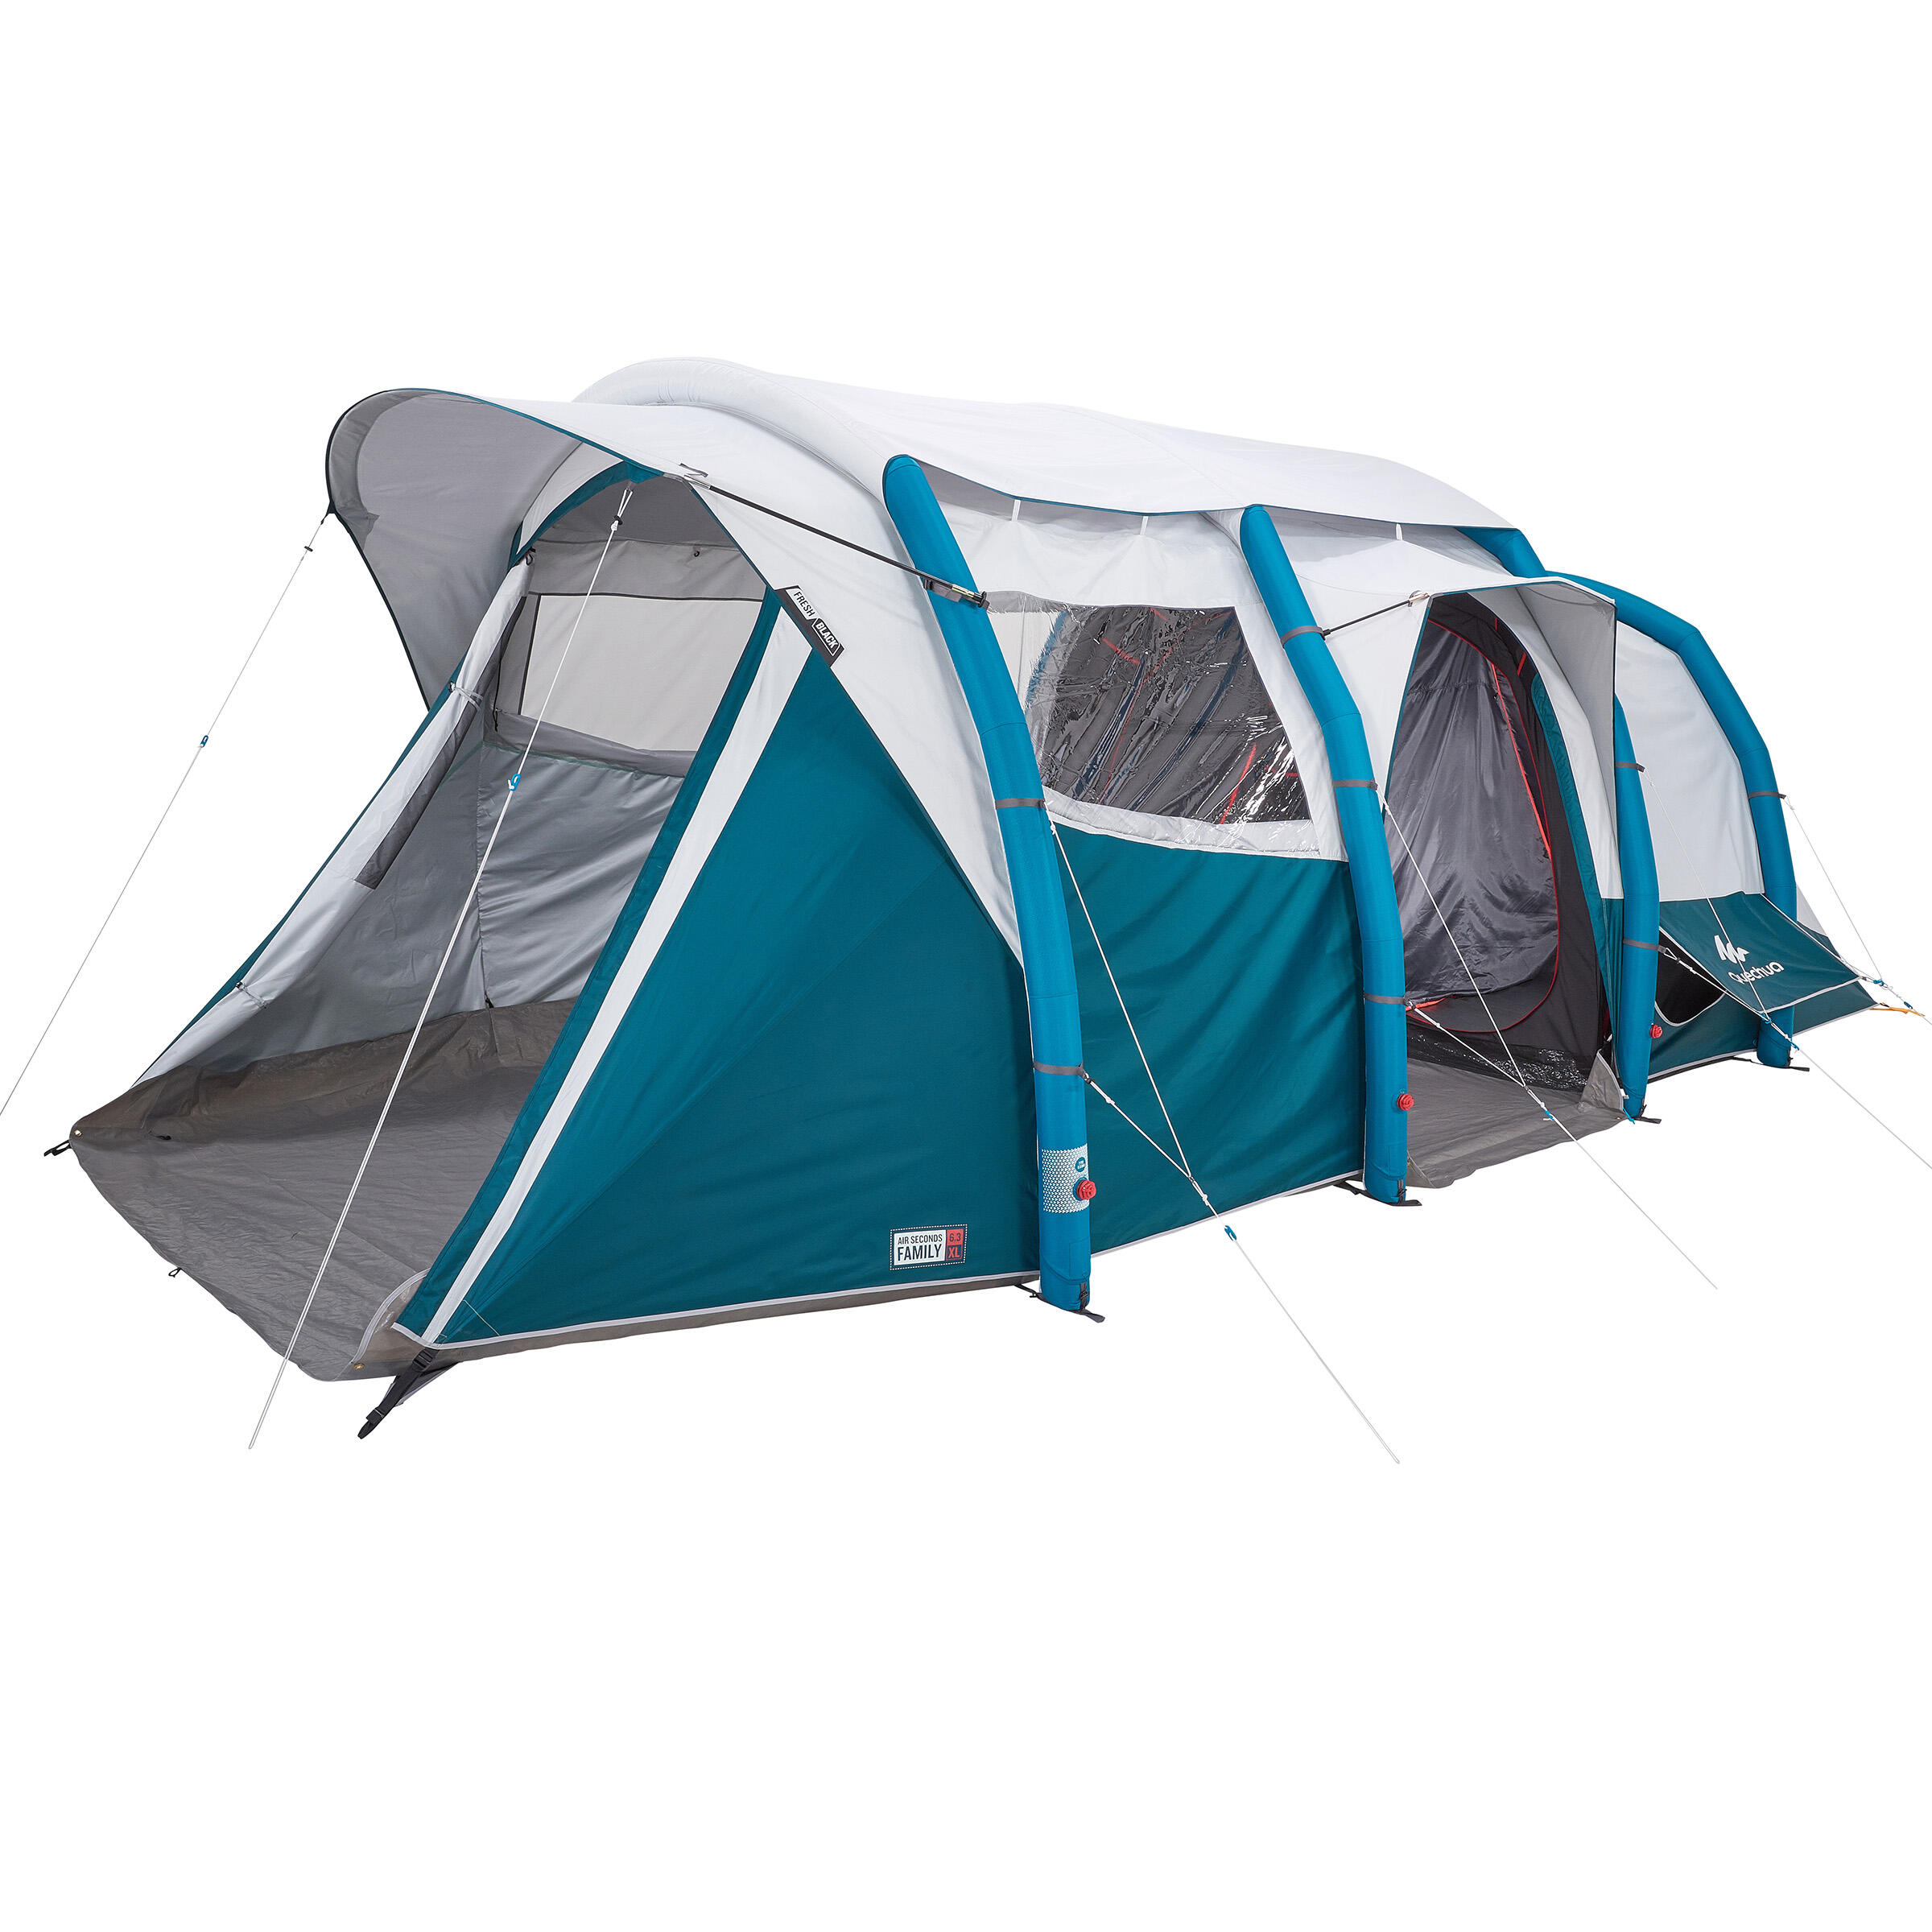 Inflatable Camping Tent - Air Seconds 6 